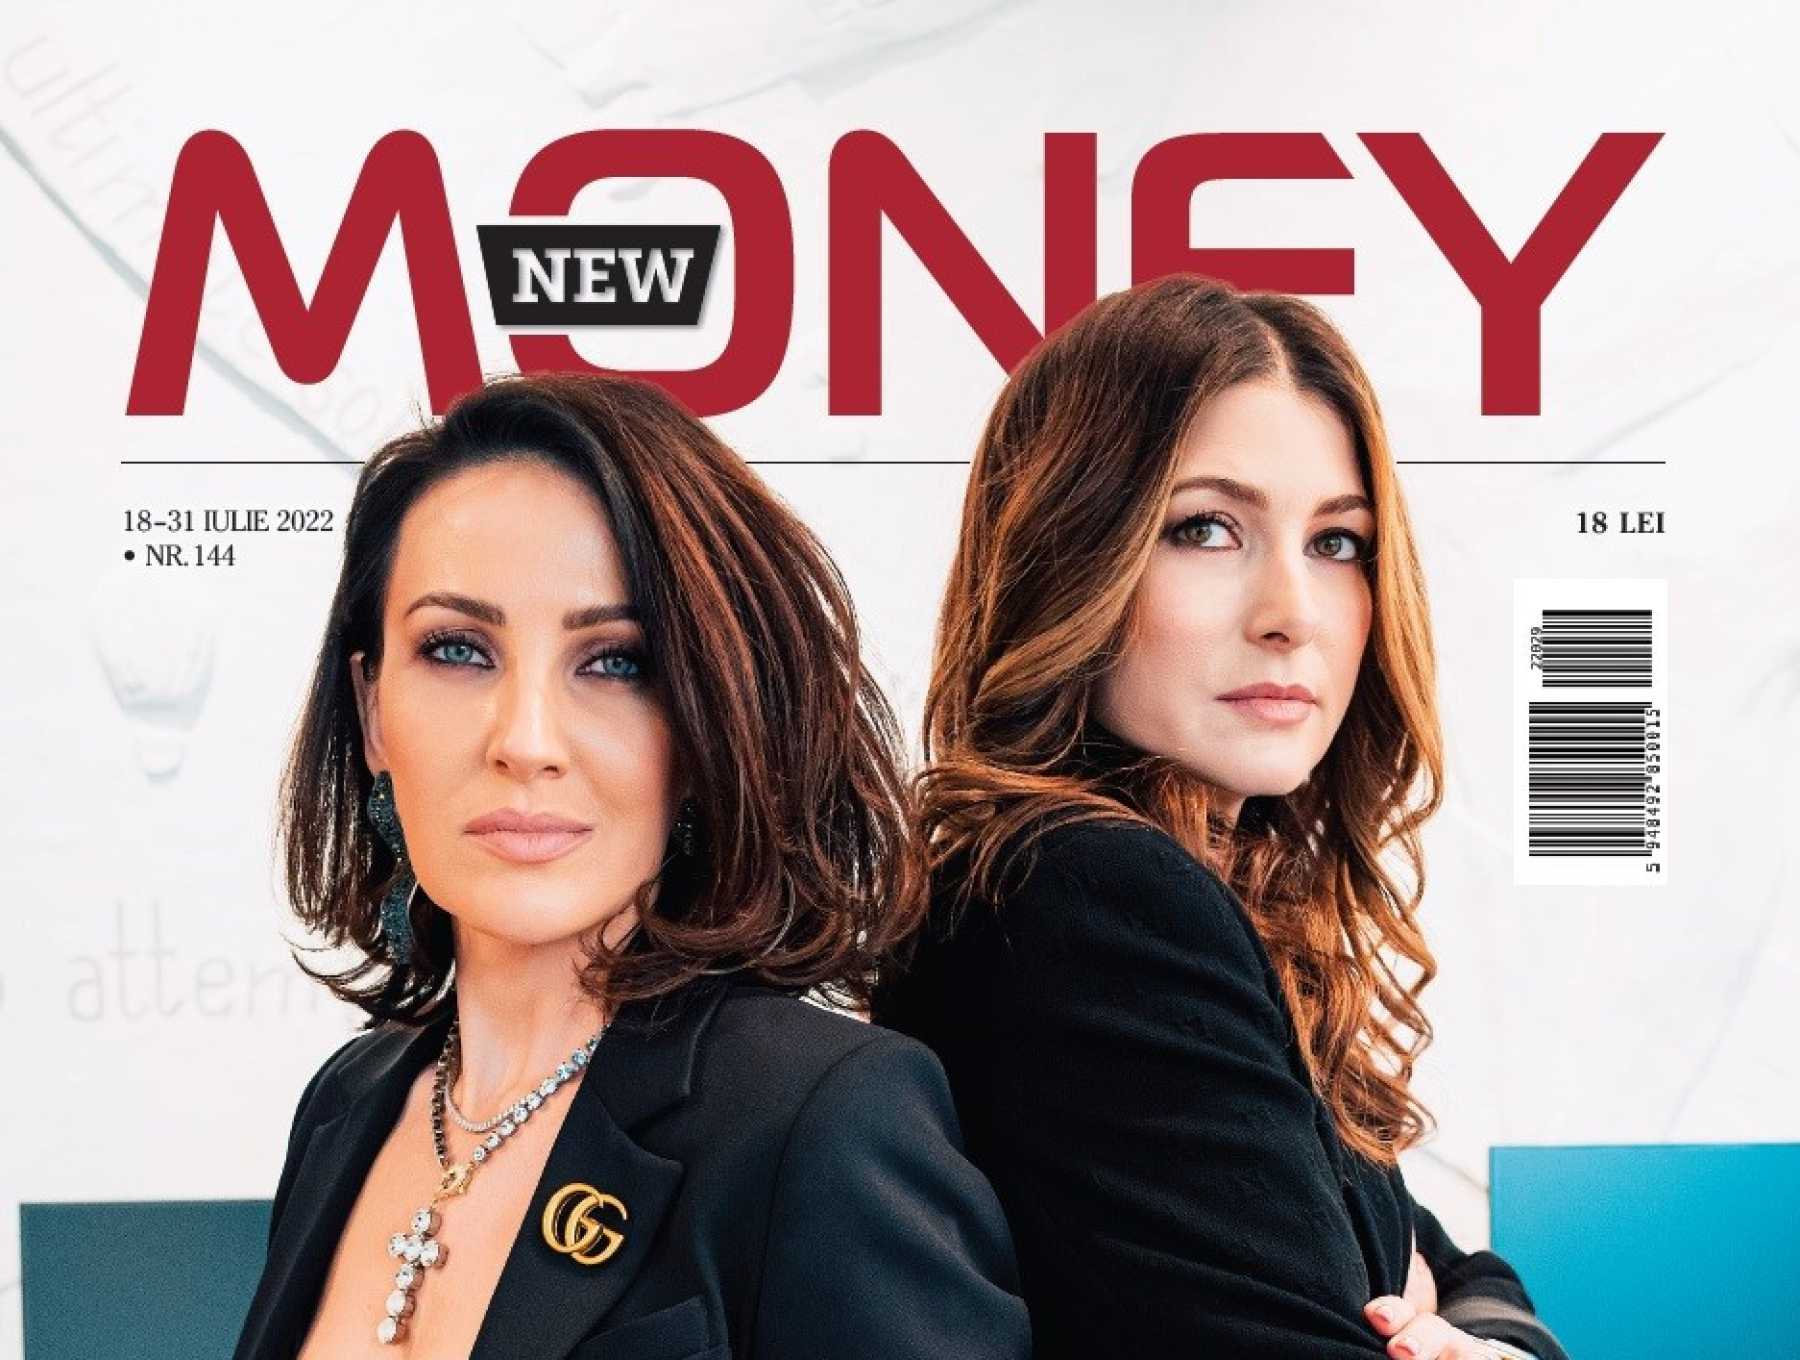 Cristina Căpitanu and Elena Oancea from Lemon Interior Design, on the cover of New Money magazine